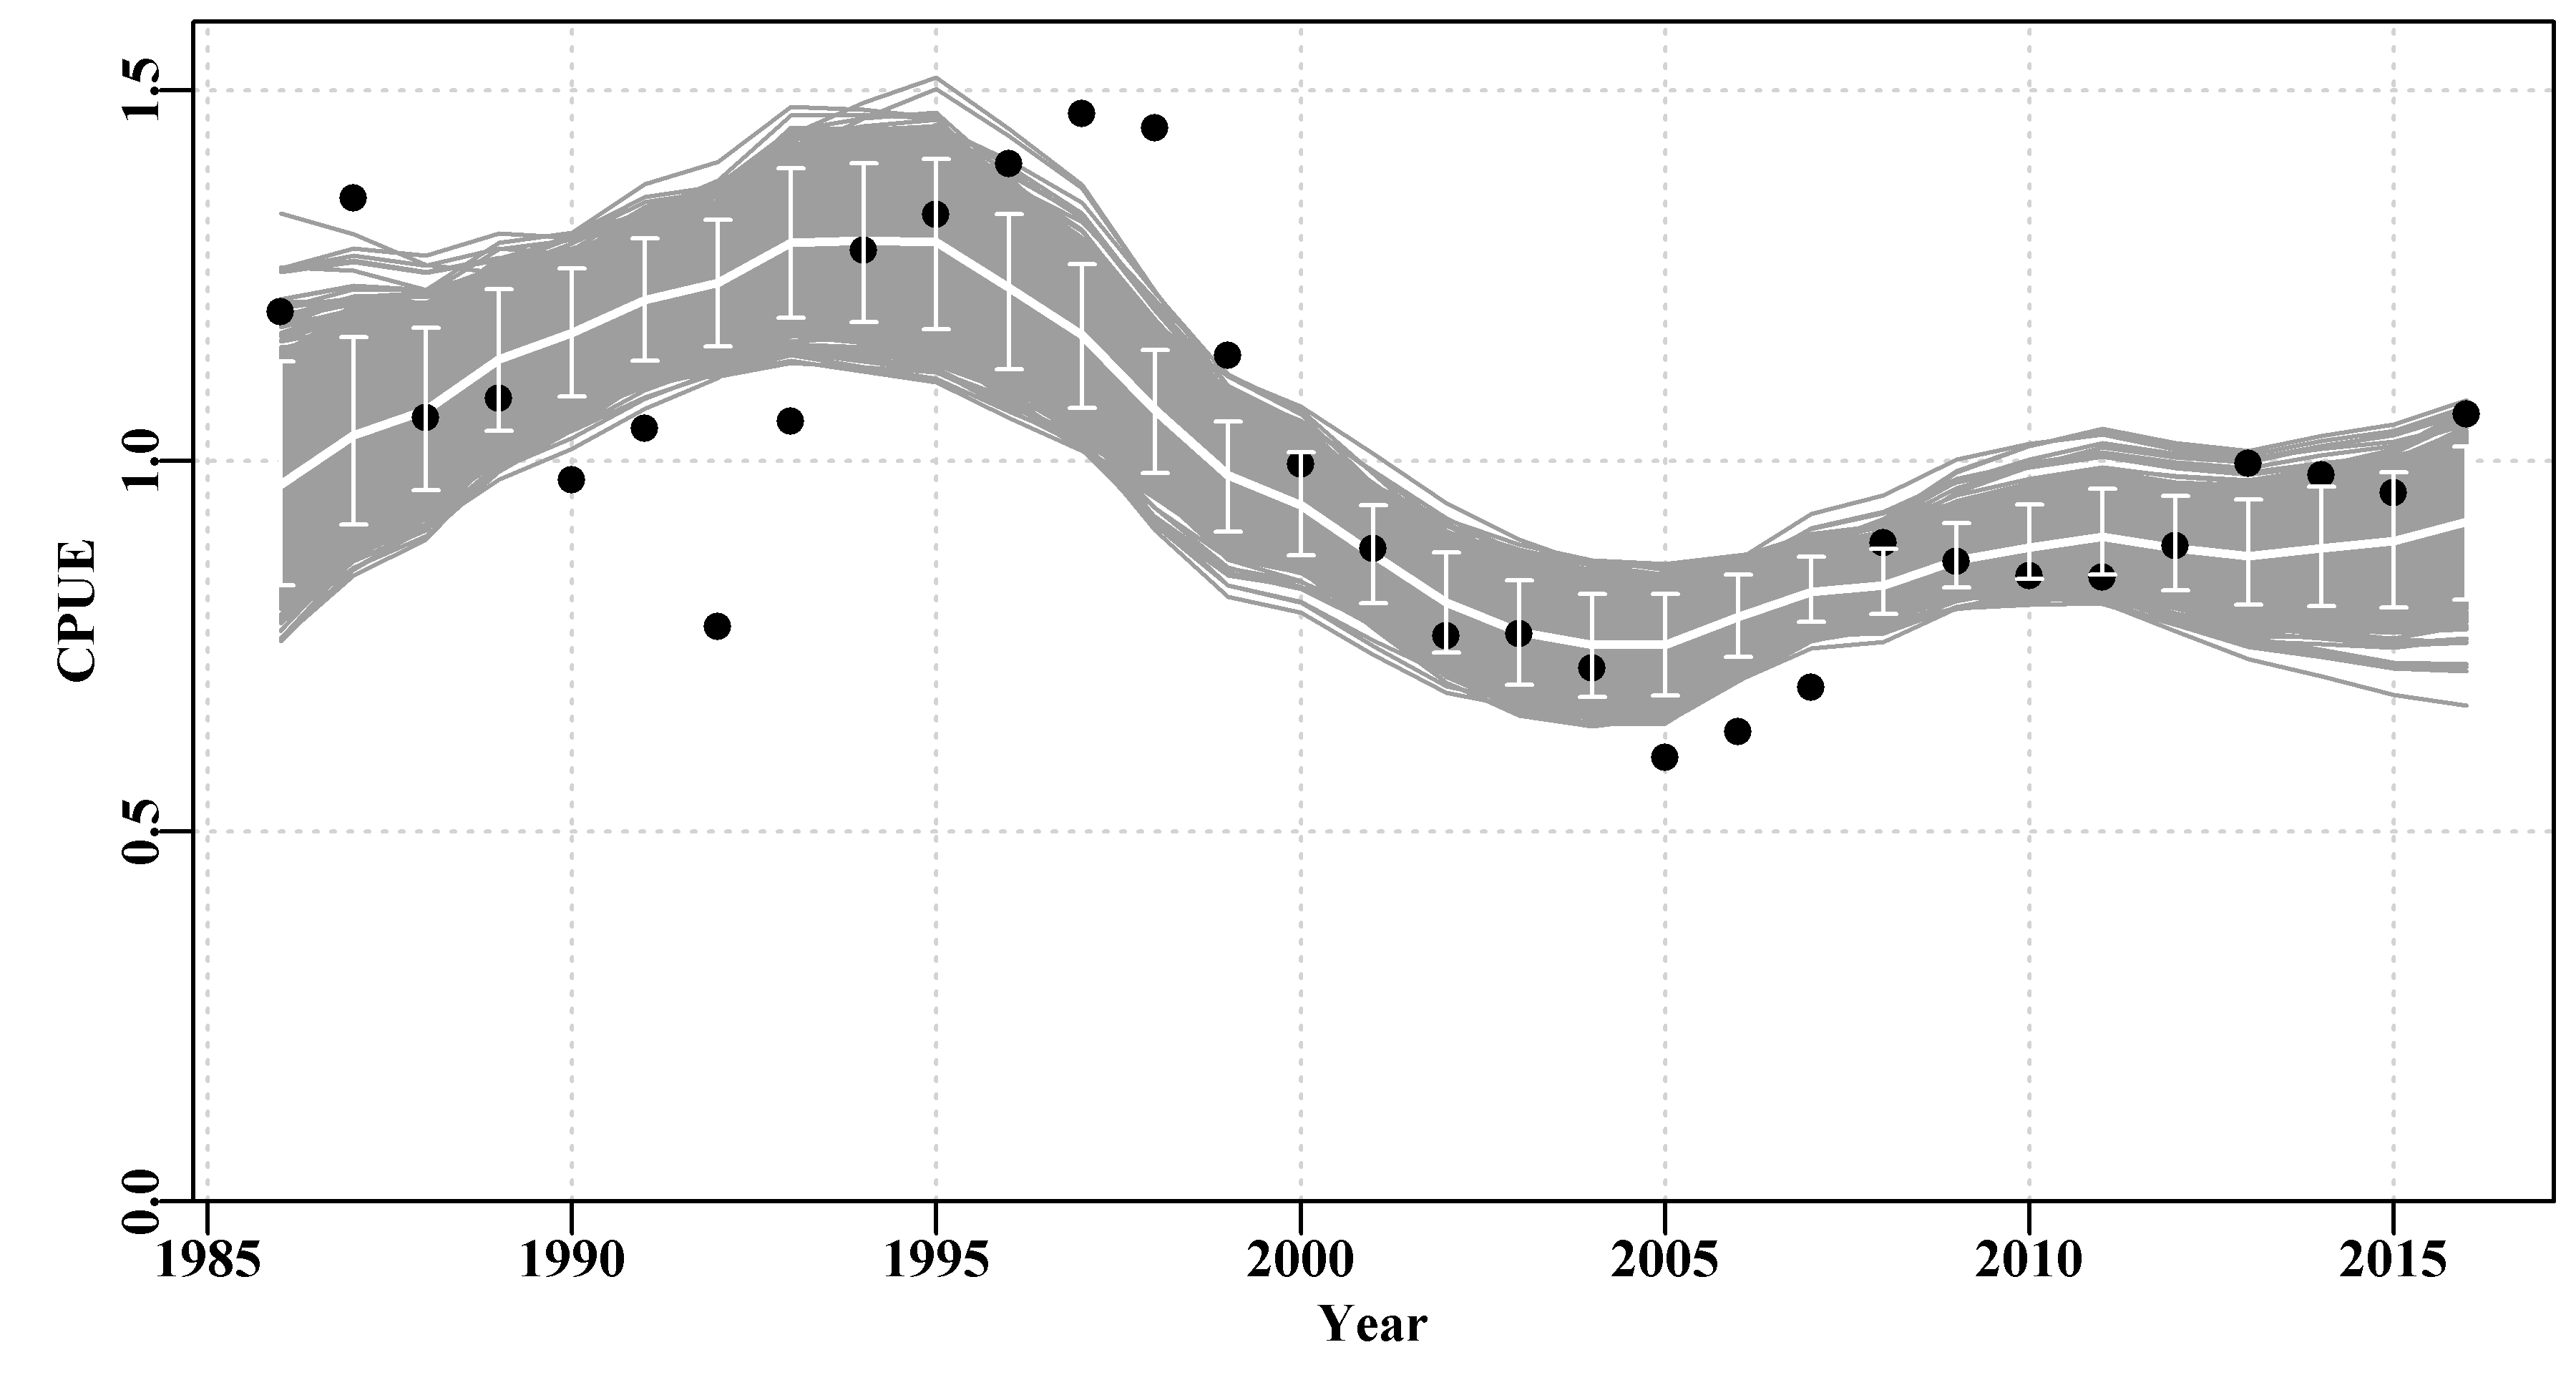 A plot of the original observed CPUE (black dots), the optimum predicted CPUE (solid line), the 1000 bootstrap predicted CPUE (the grey lines), and the 90th percentile confidence intervals around those predicted values (the vertical bars).